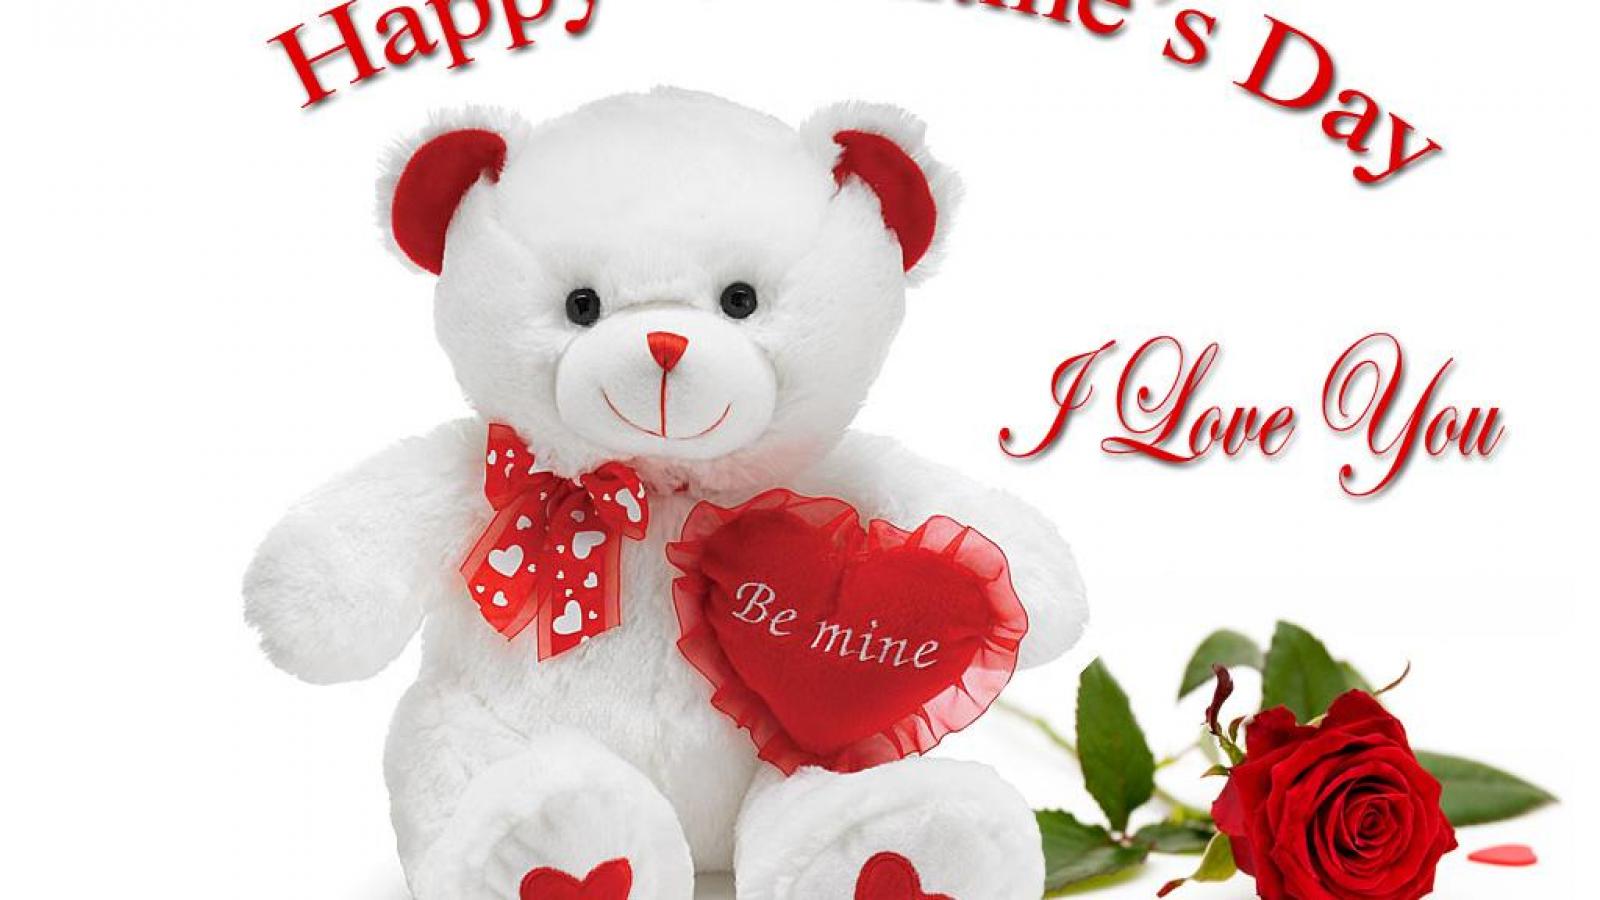 HAPPY VALENTINE S DAY WALLPAPER - (#54981) - HD Wallpapers ...